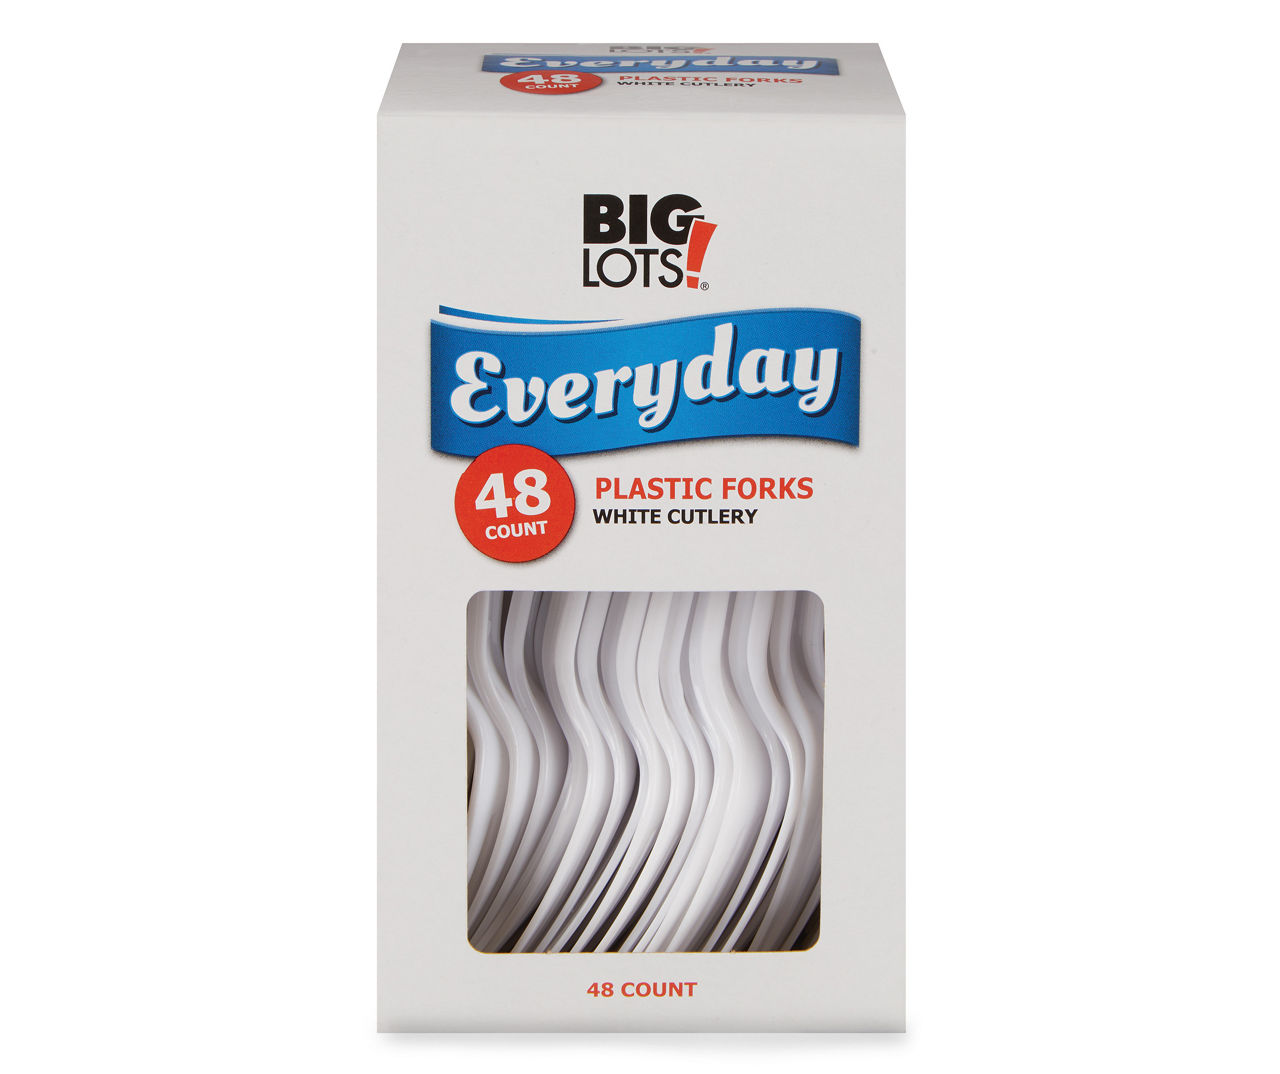 Big Lots Red Plastic 18 Oz. Everyday Party Cups, 120-Count